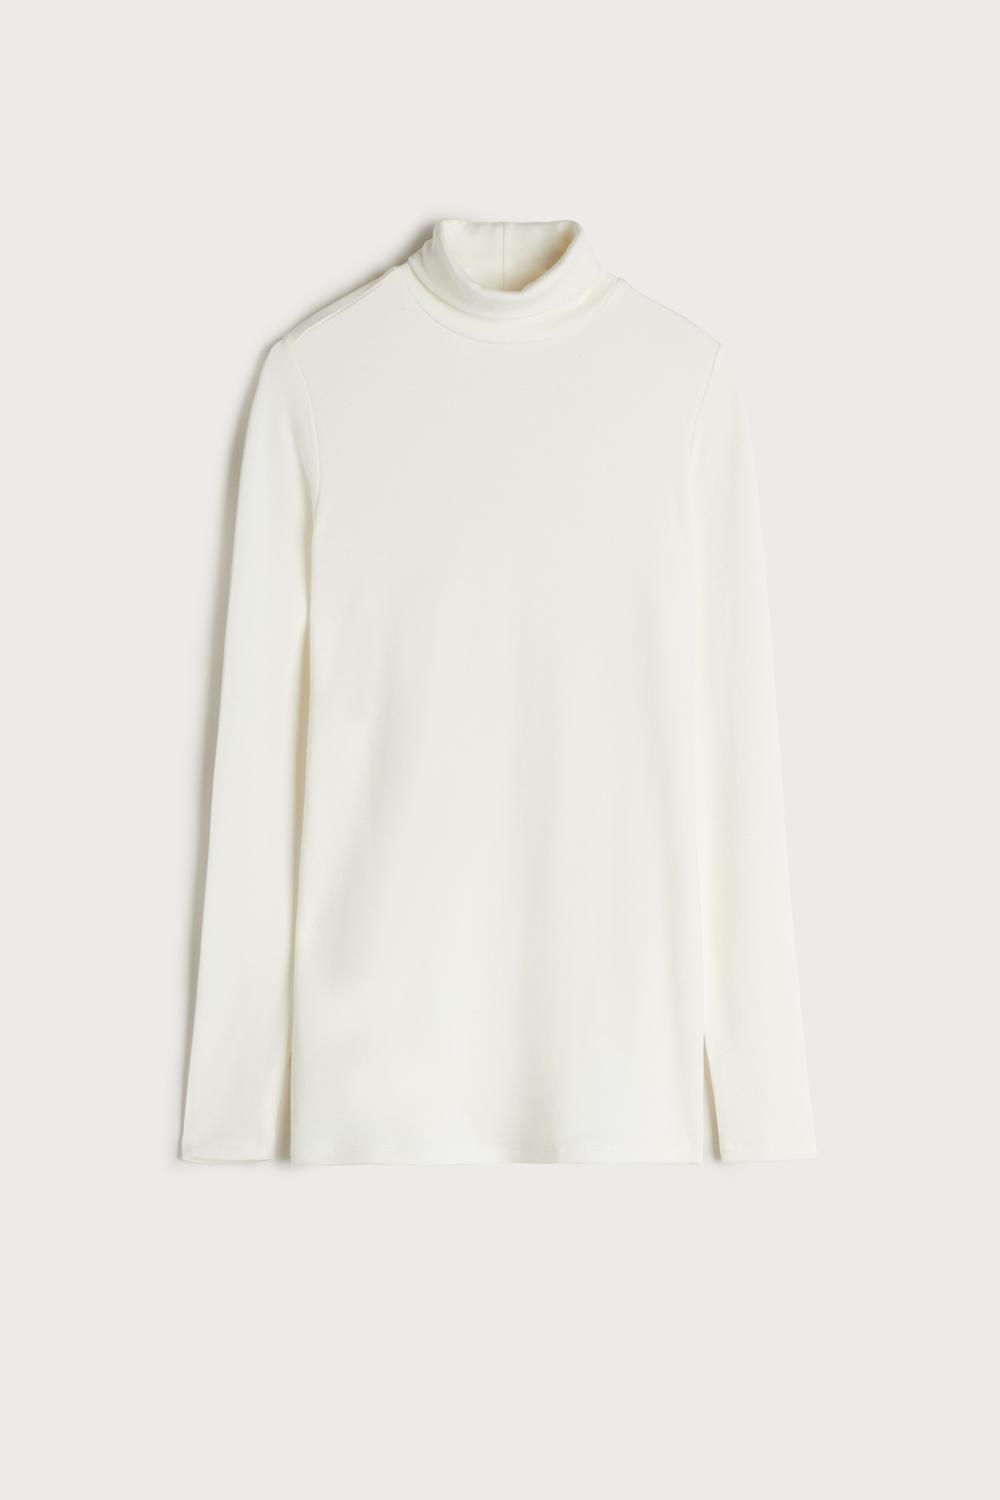 Long-Sleeved High-Neck Modal and Cashmere Shirt - Intimissimi